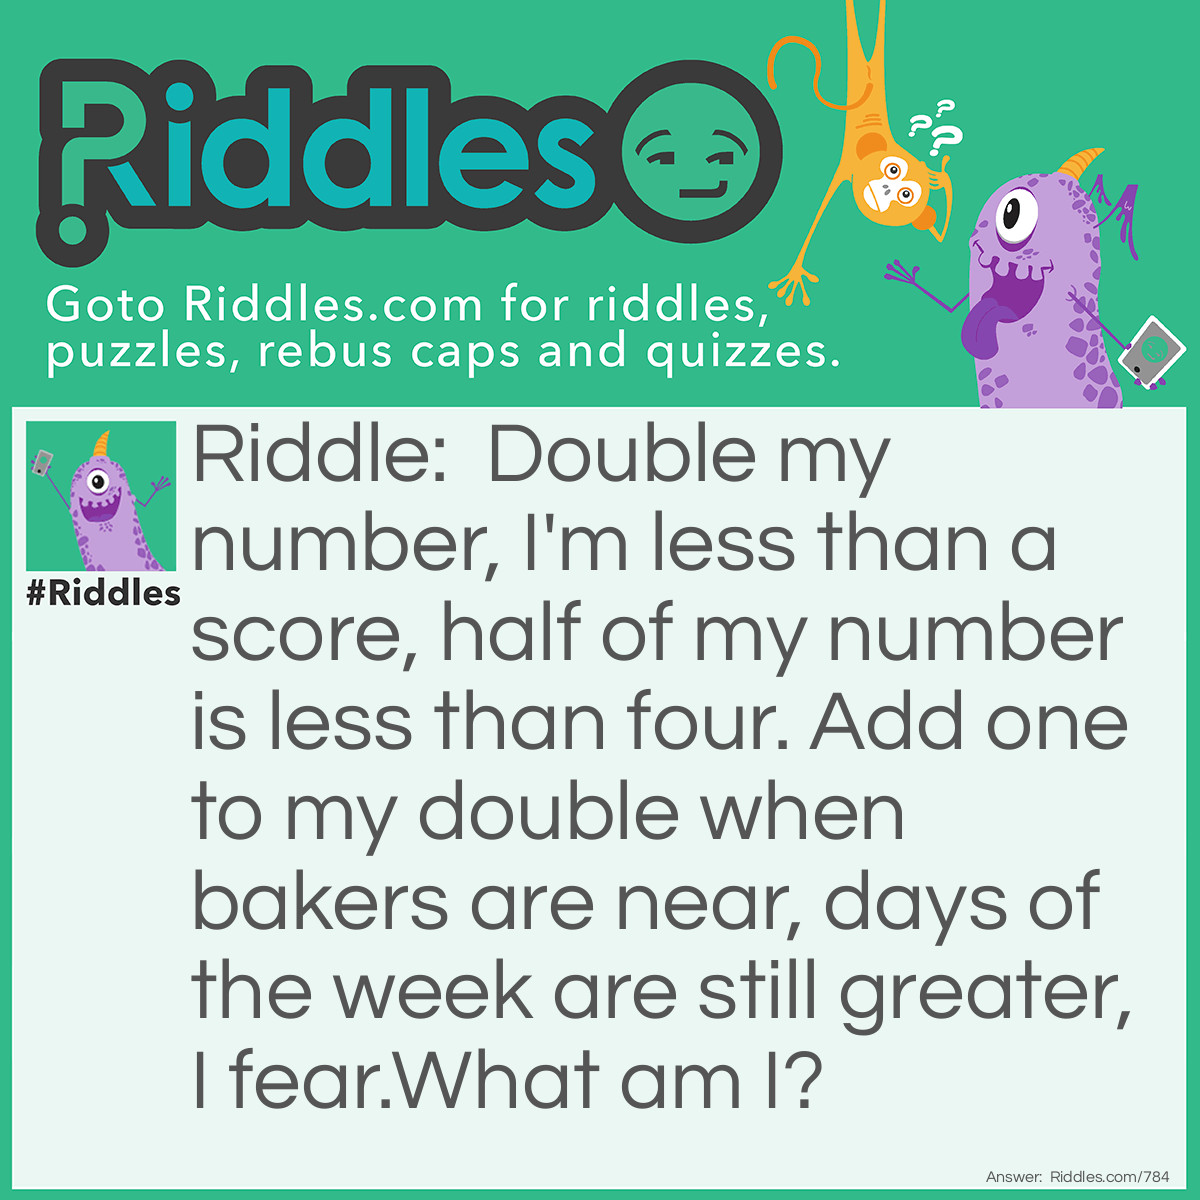 Riddle: Double my number, I'm less than a score, half of my number is less than four. Add one to my double when bakers are near, days of the week are still greater, I fear. 
What am I? Answer: The number six.